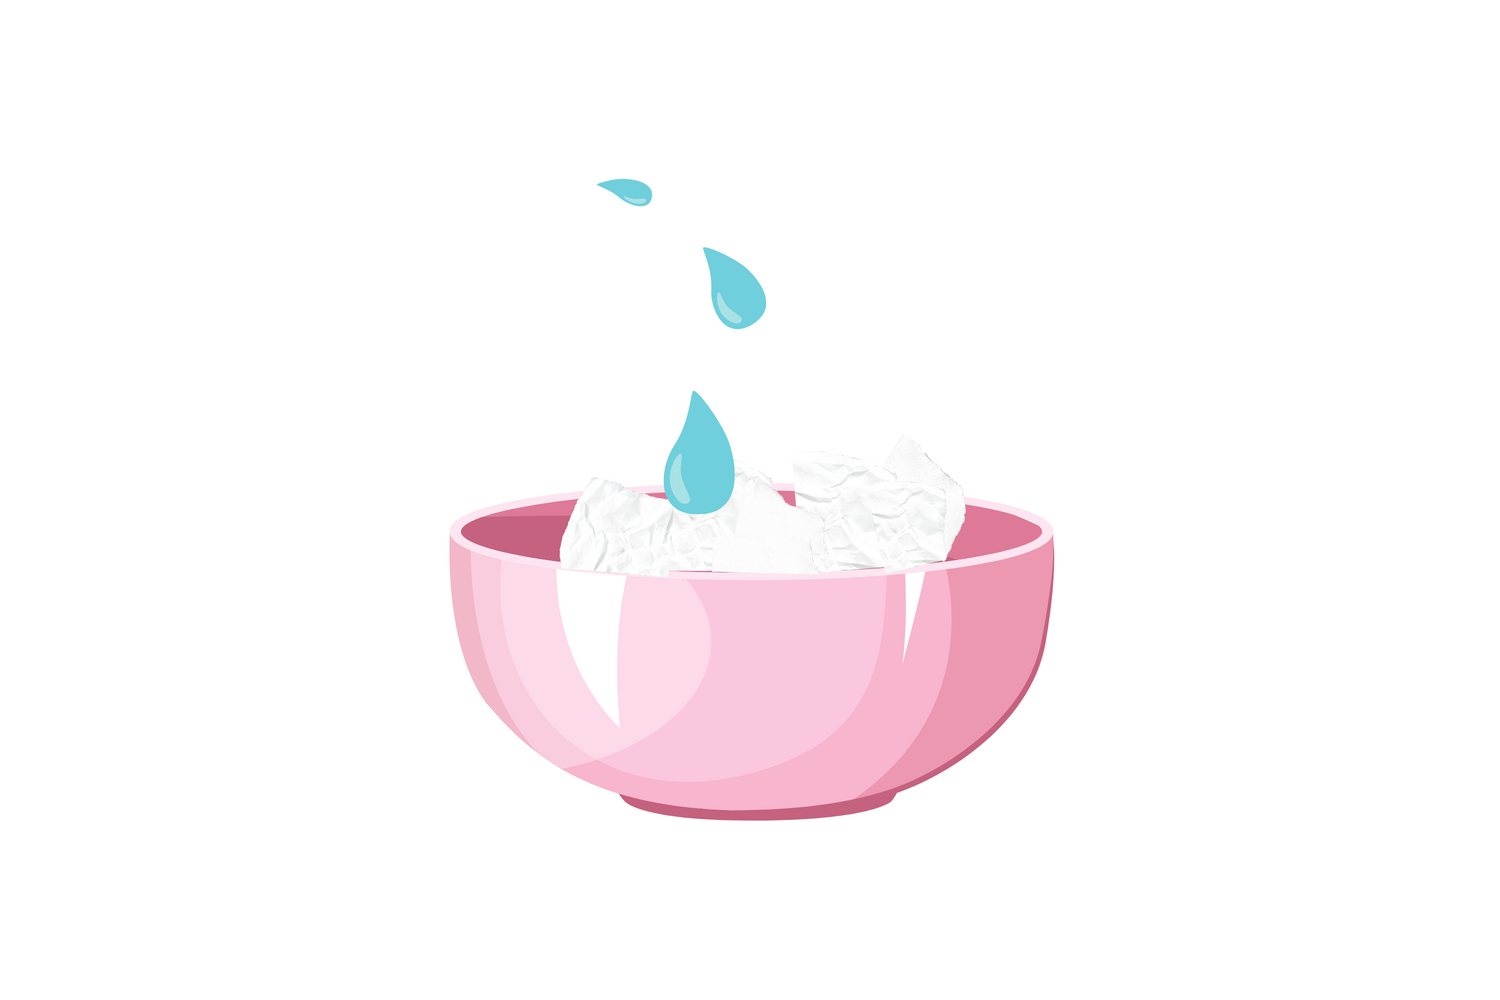 graphic of a pink bowl with water drips